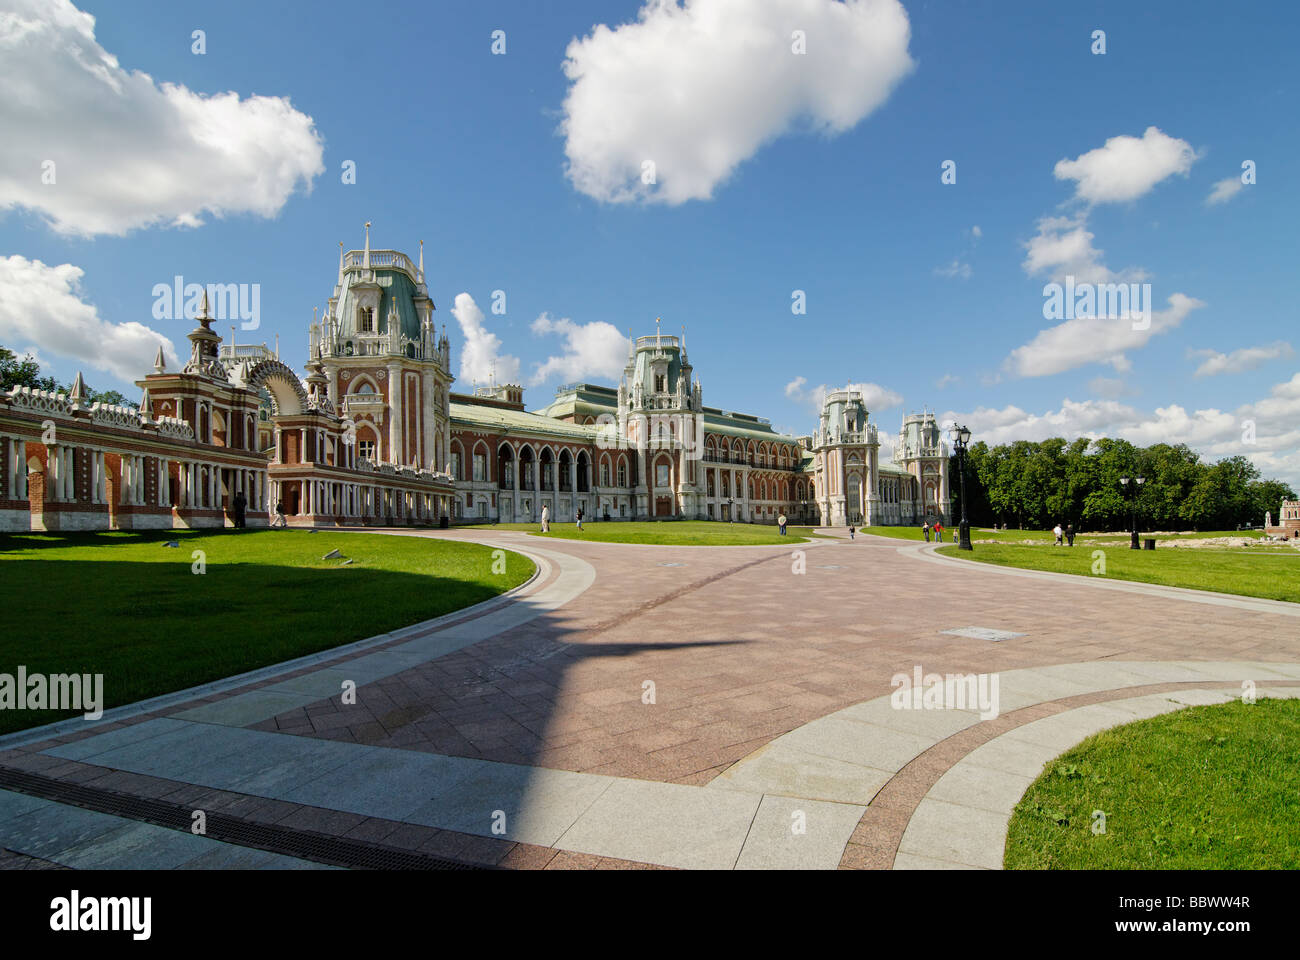 The Grand Palace in Tsaritsyno estate. Moscow, Russia Stock Photo